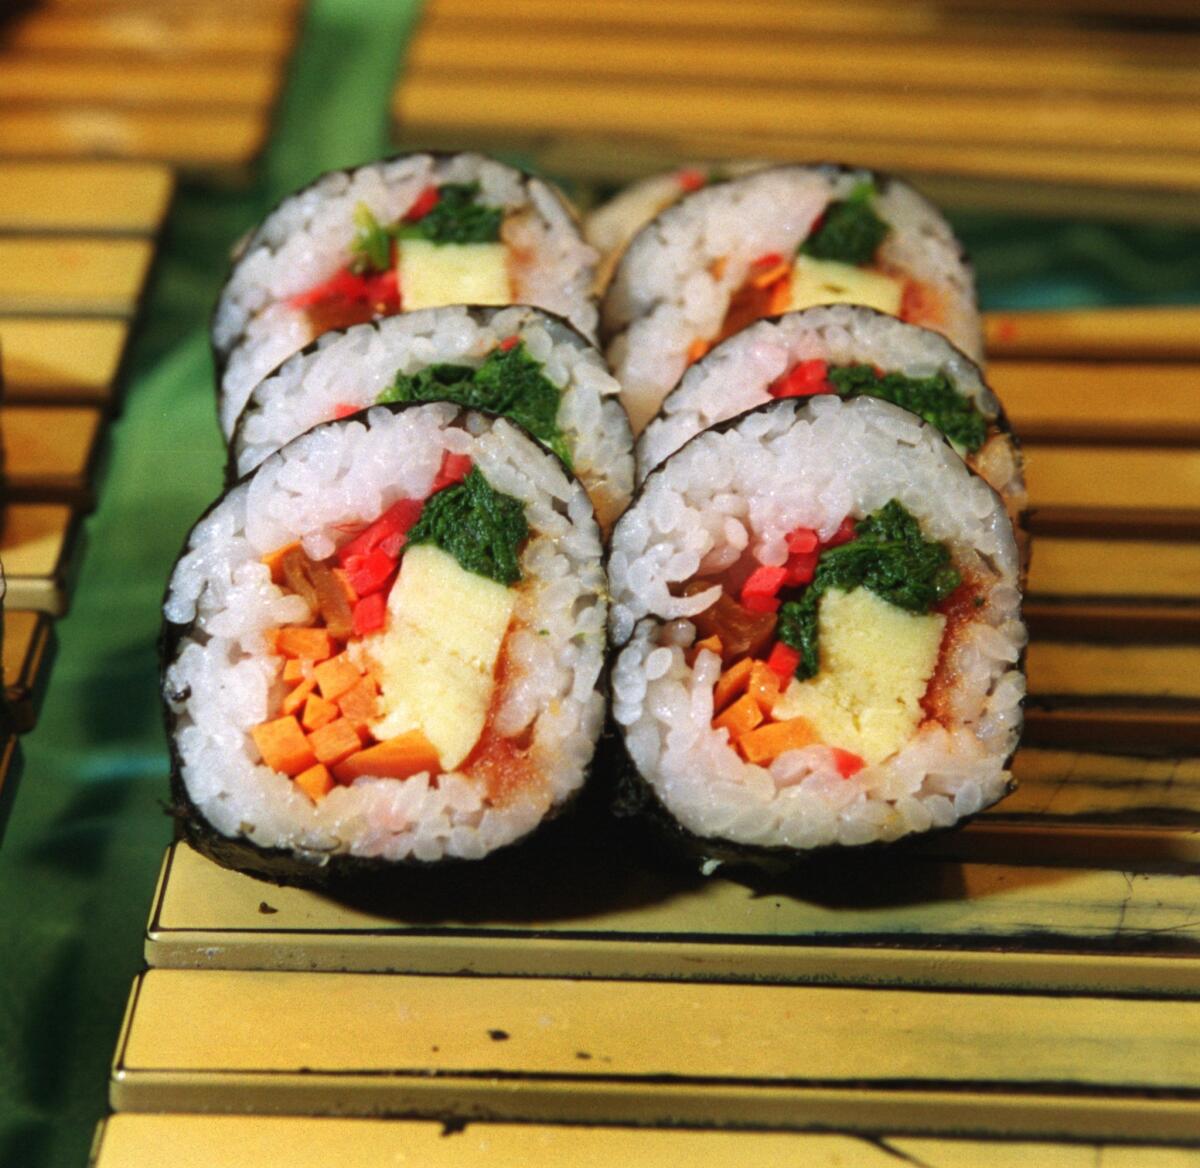 Pair sushi with a dry to medium-dry Riesling, recommends Stuart Pigott, a wine writer.